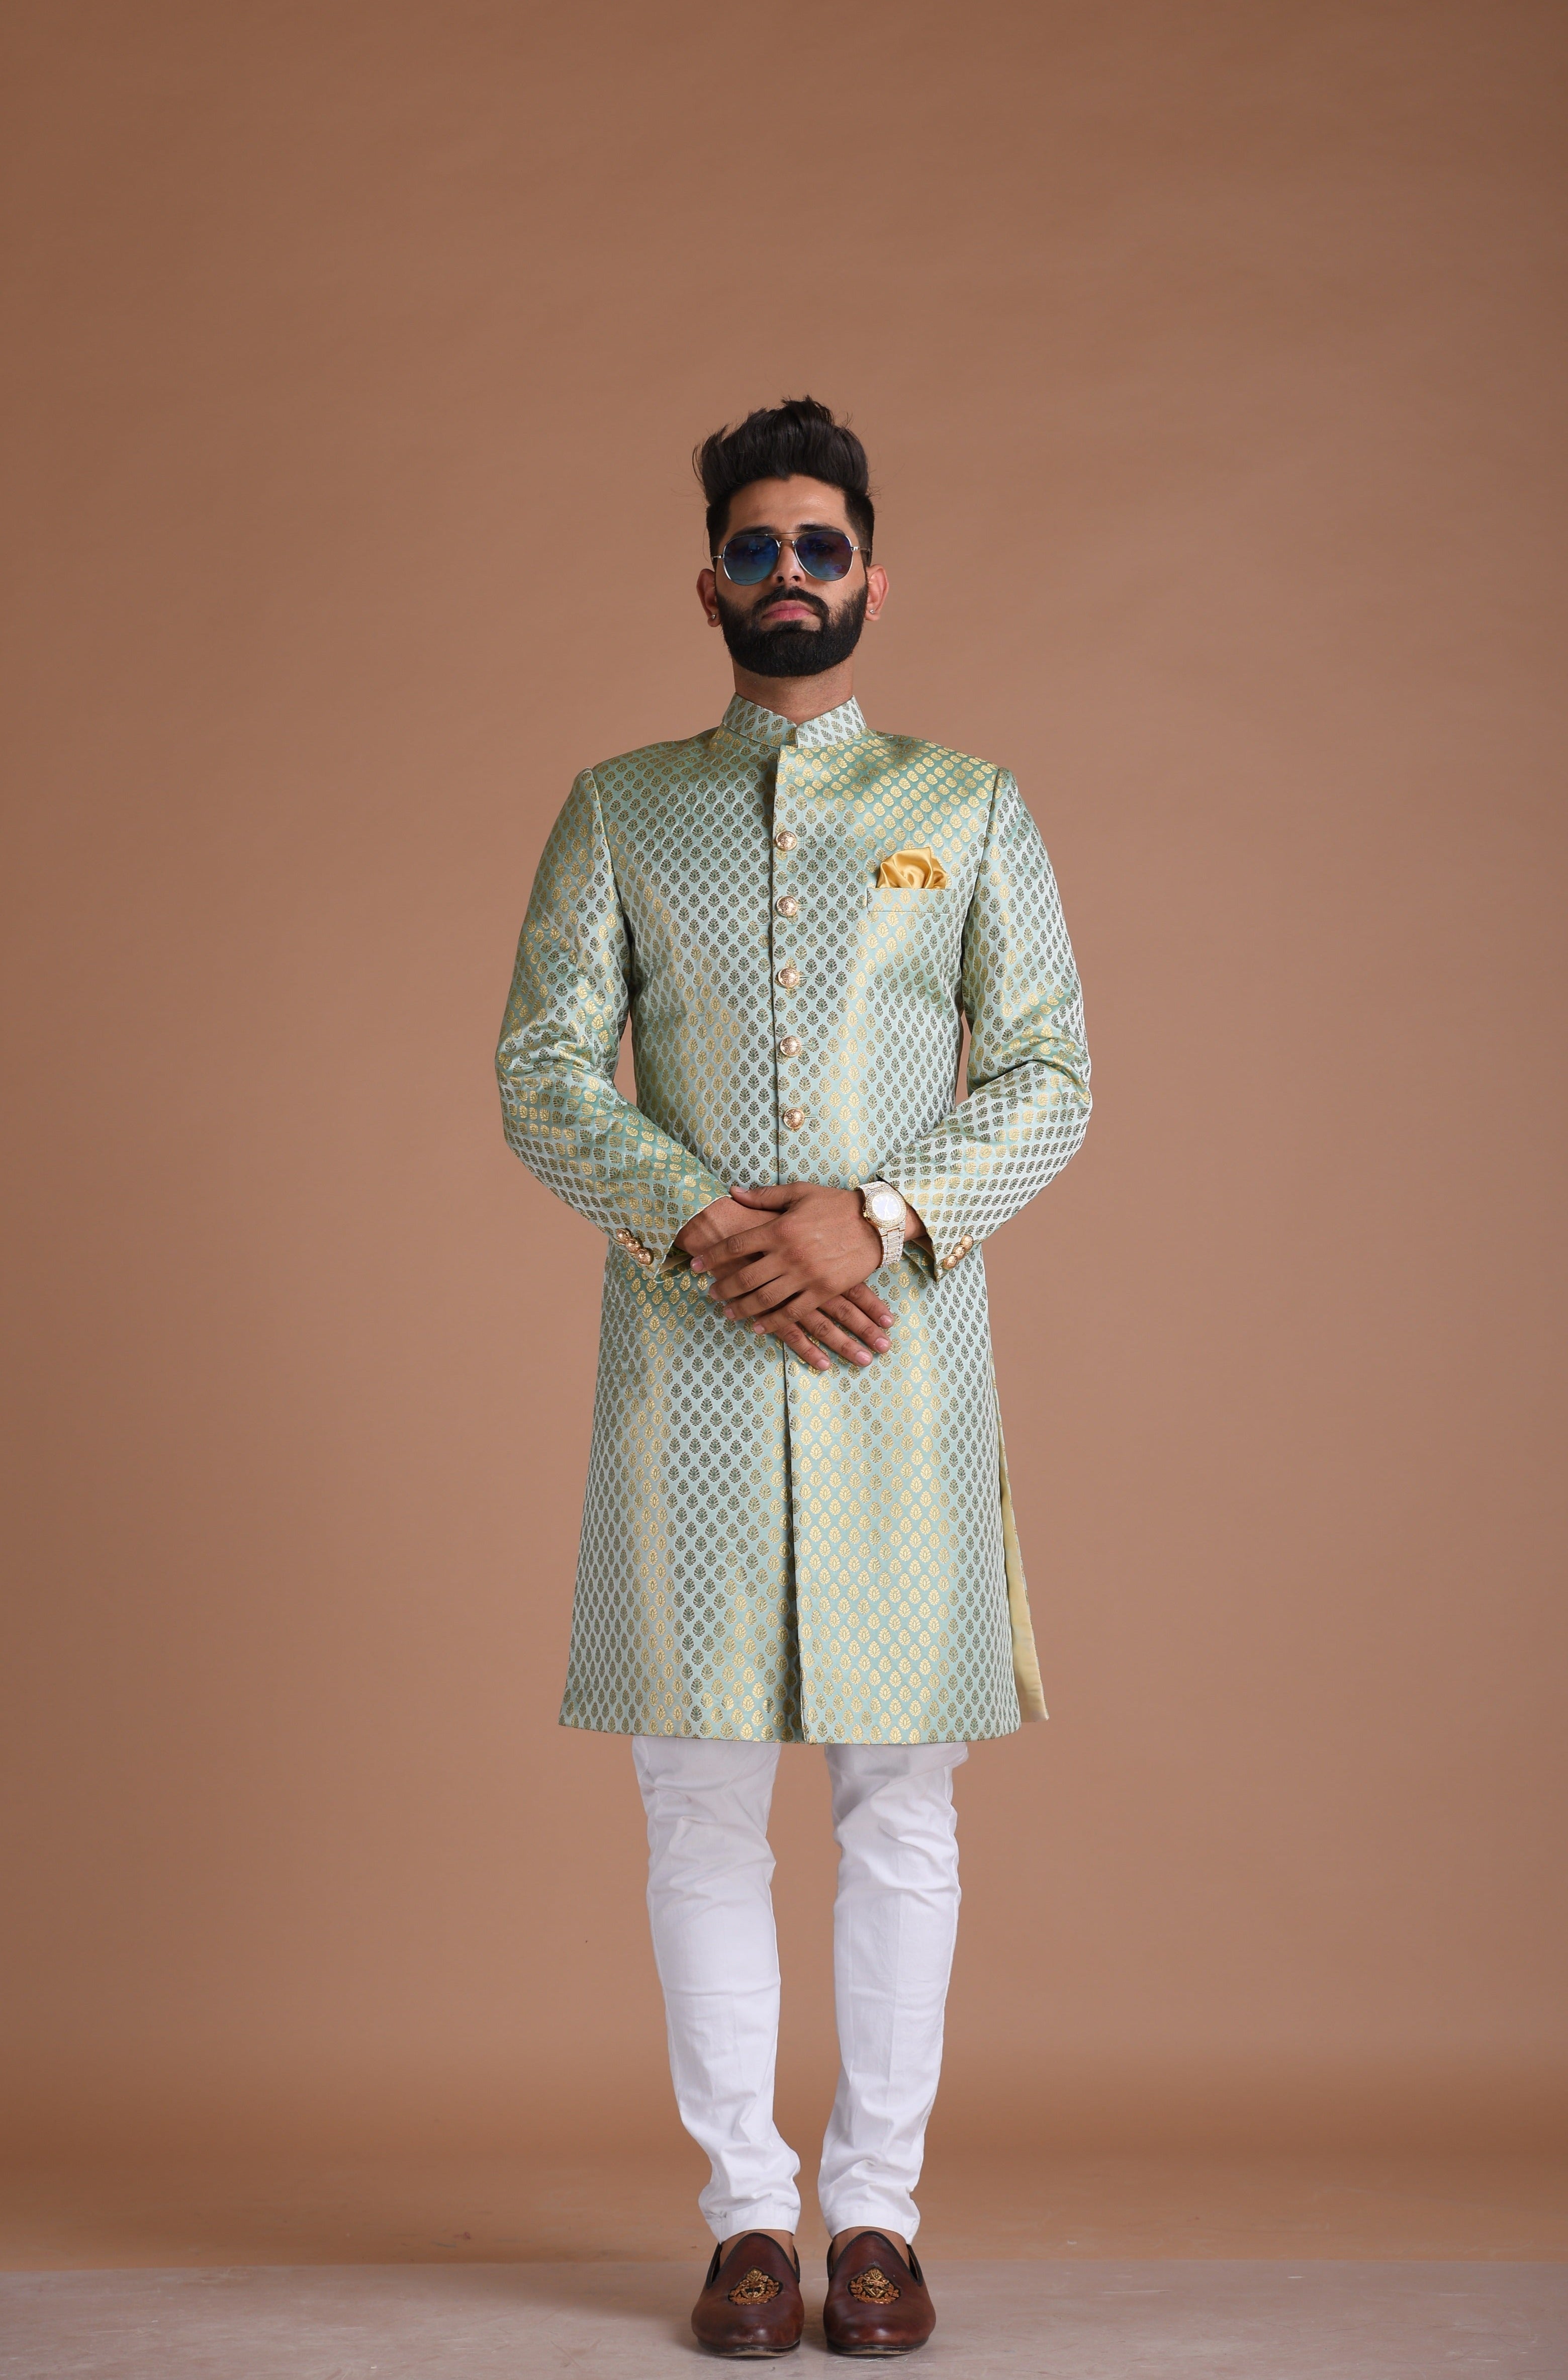 Alluring Aquamarine Hand-crafted KimKhab Banarasi Brocade Sherwani Achkan for Men | Available in Father Son Combo | Sky blue Color | Formal Kurta Style wear | Perfect for Grooms